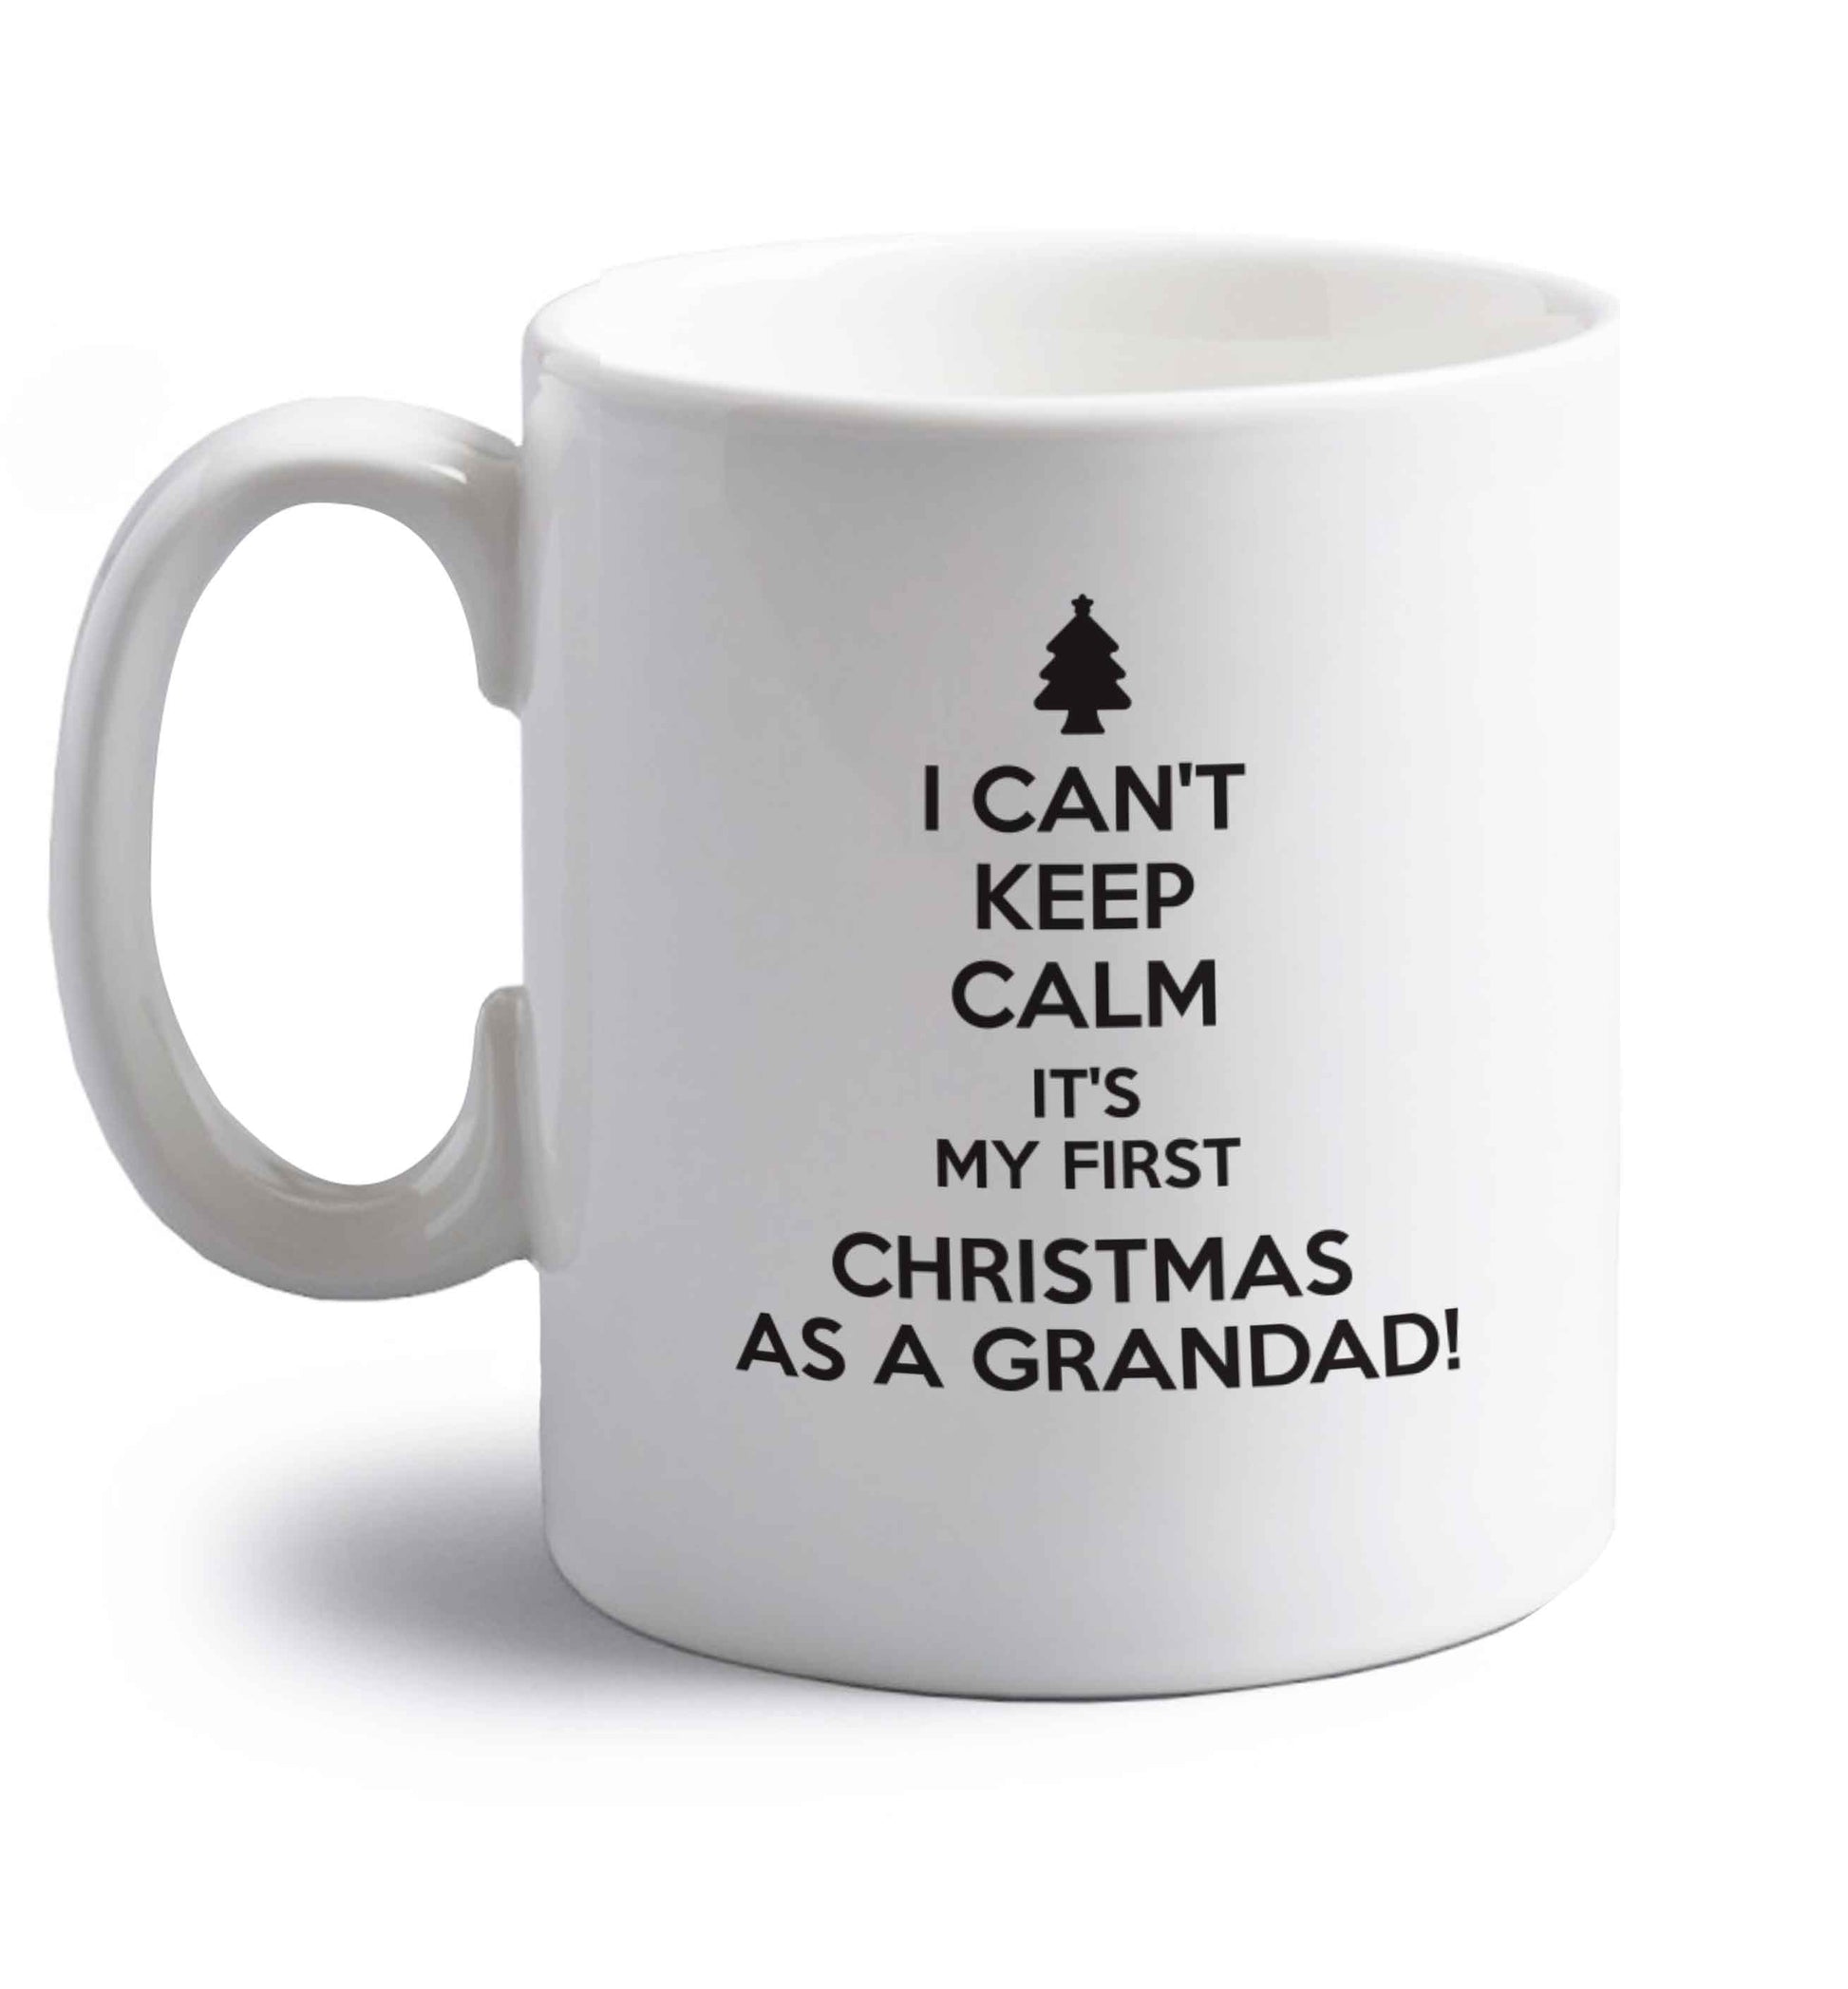 I can't keep calm it's my first Christmas as a grandad! right handed white ceramic mug 